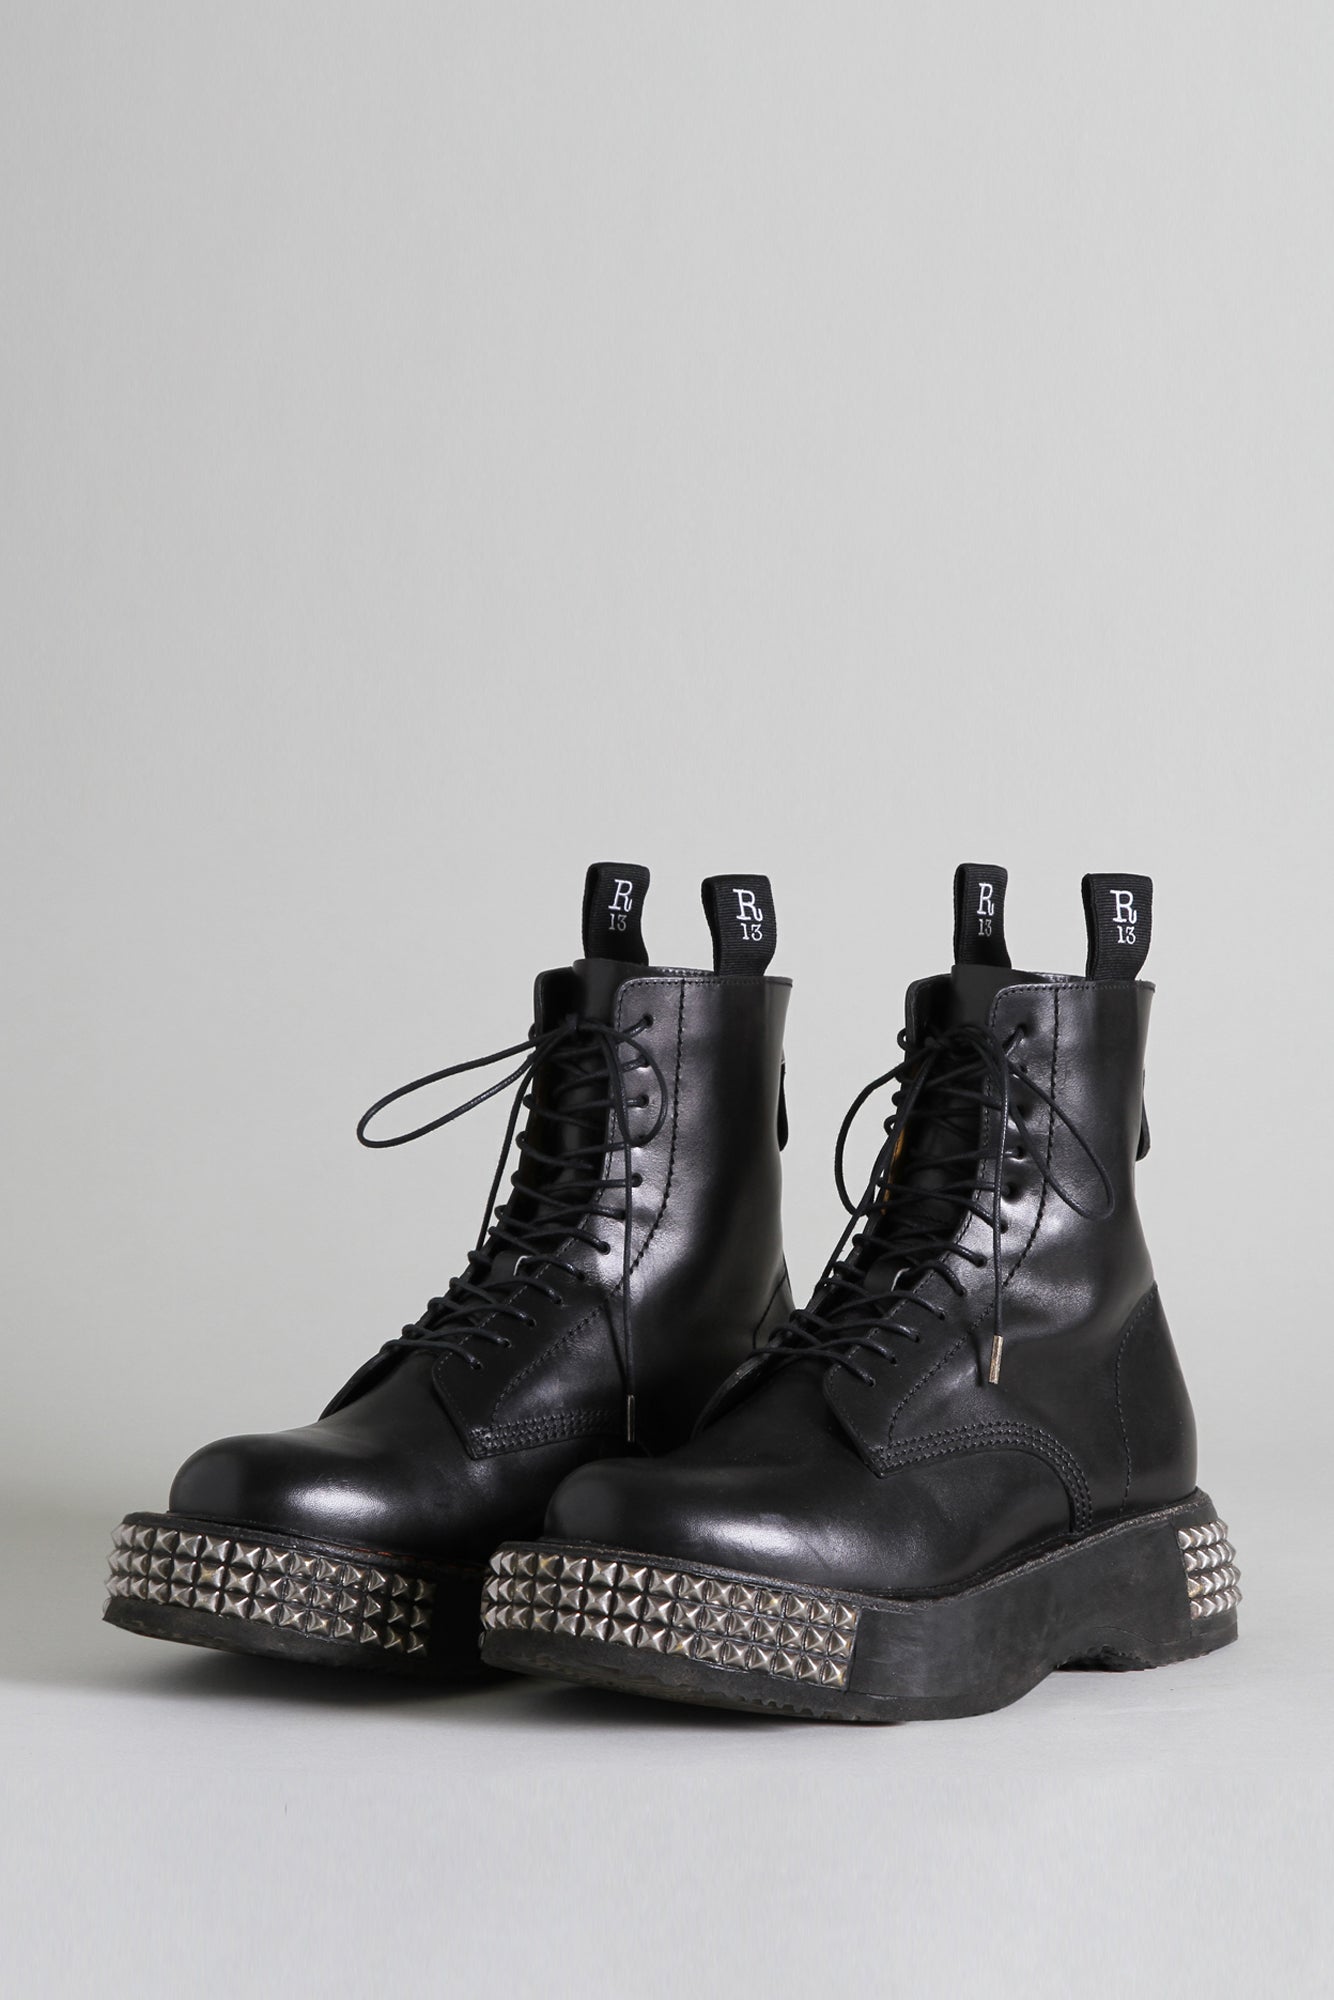 SINGLE STACK BOOT WITH STUD SOLE BLACK – R13